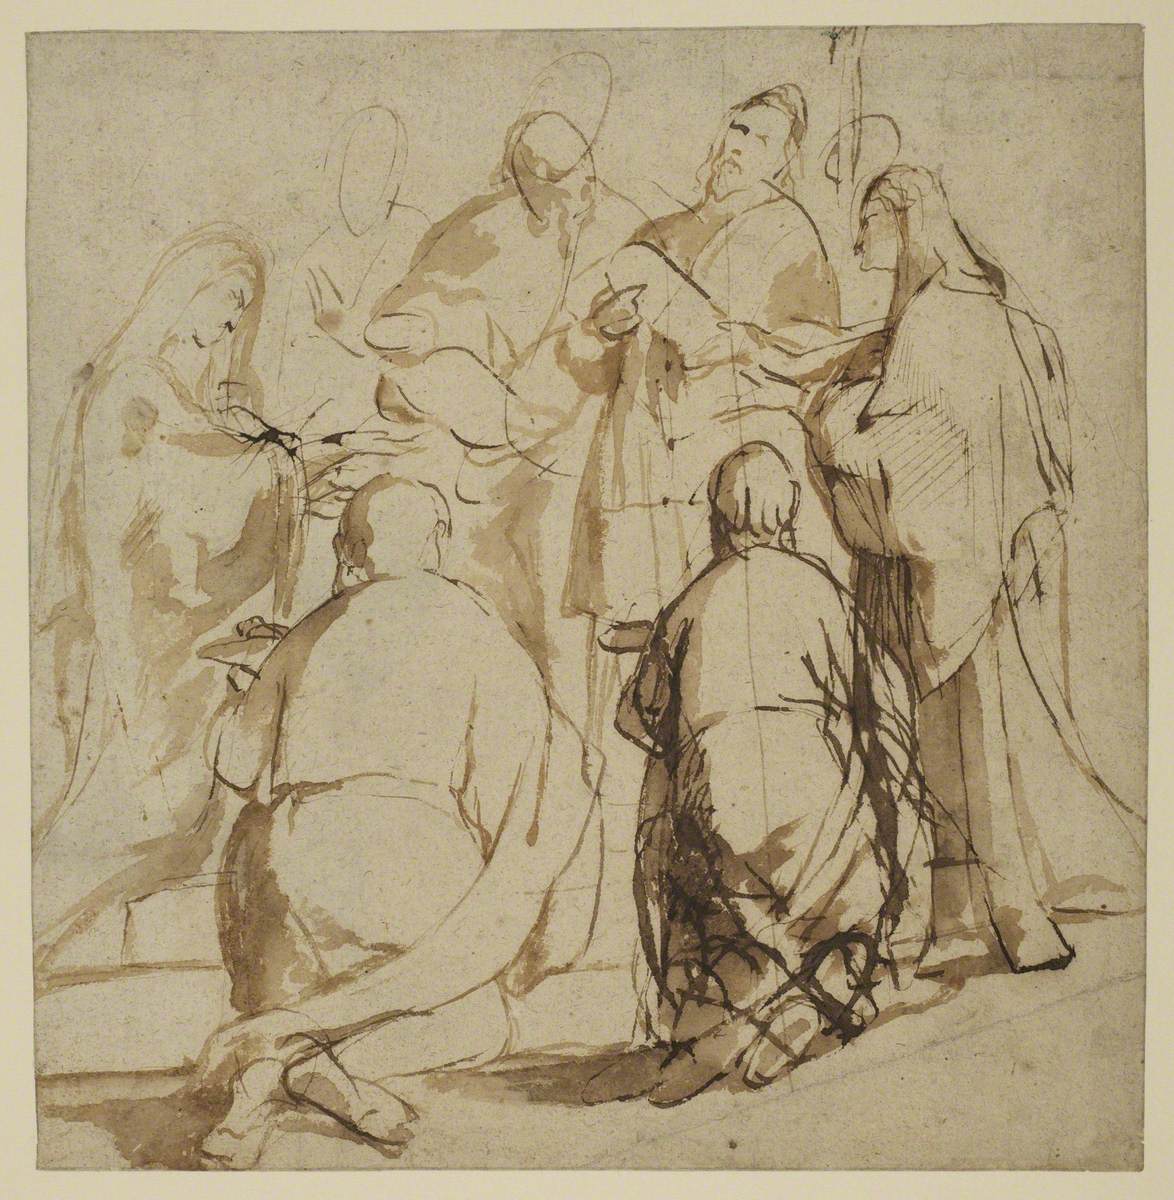 Studies for the Presentation in the Temple